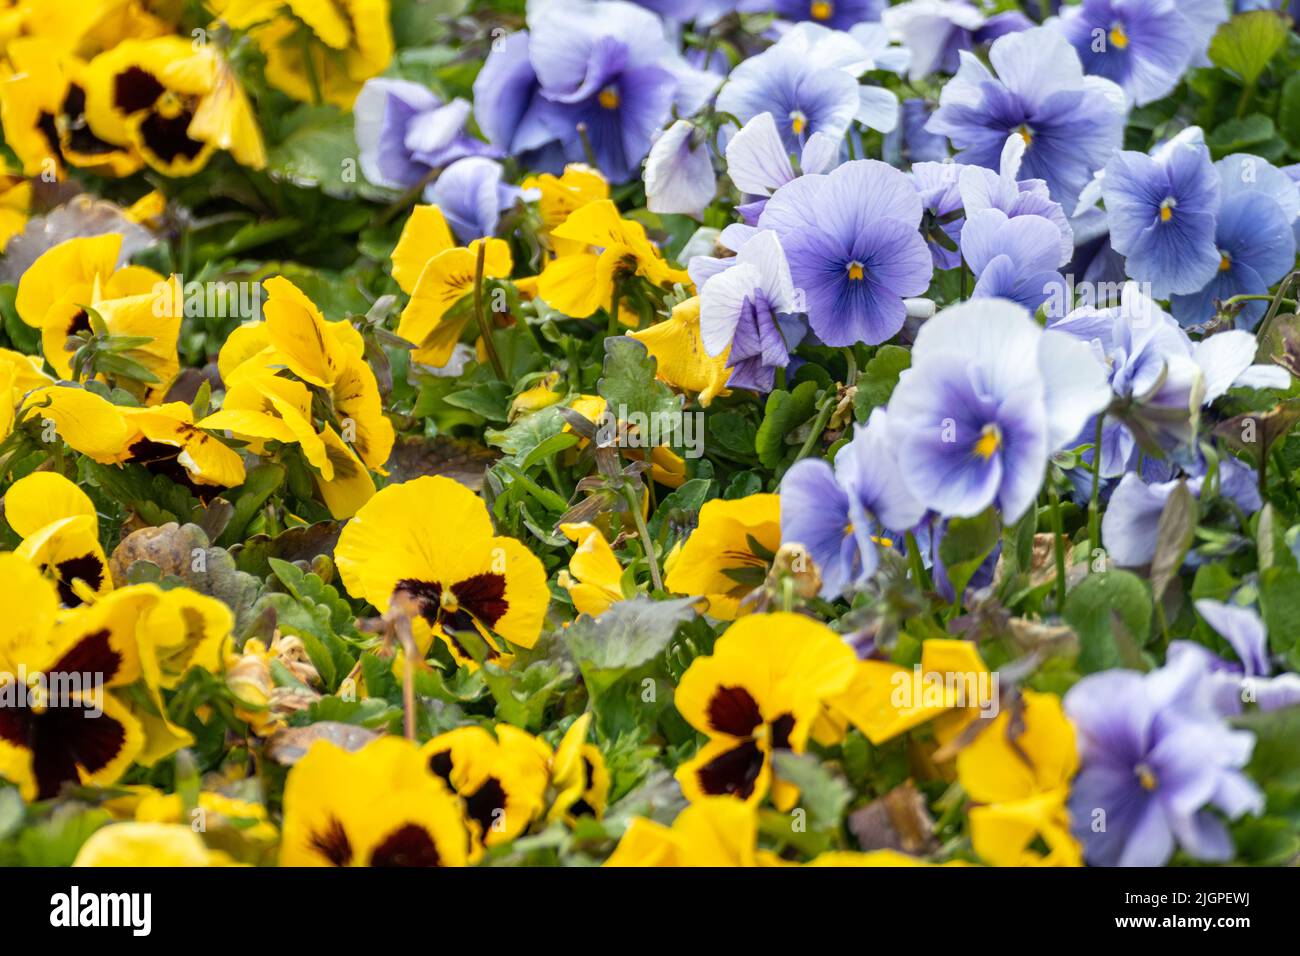 Vibrant yellow and blue Viola Cornuta pansies flowers close-up, flower bed with blooming colorful heartsease pansy flowers with green leaves Stock Photo